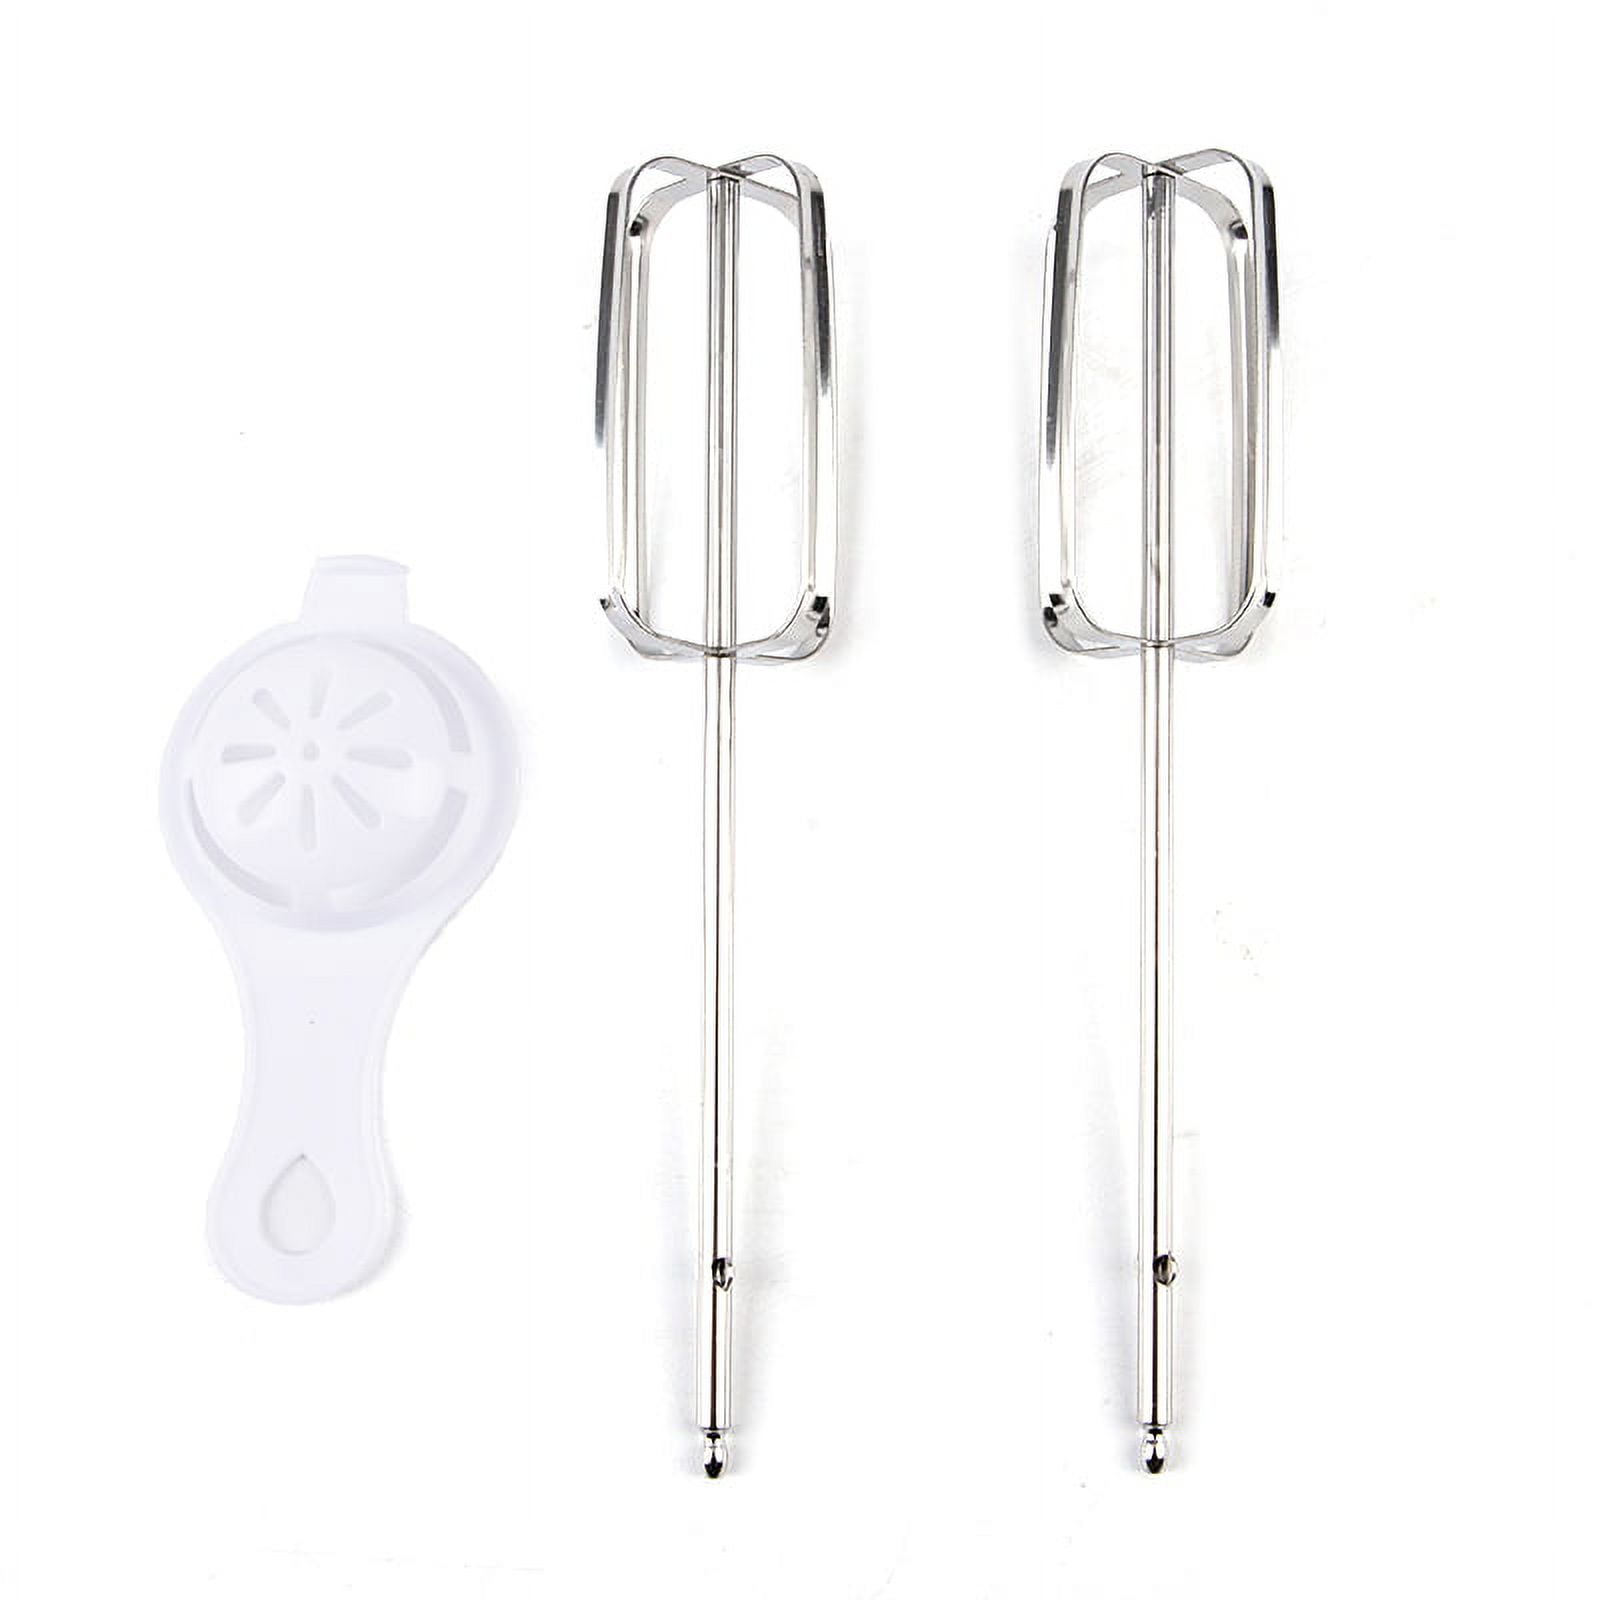 GENUINE KENWOOD HAND MIXER REPLACEMENT BEATERS HMP30 (SET OF 2) METAL WHISK  NEW!